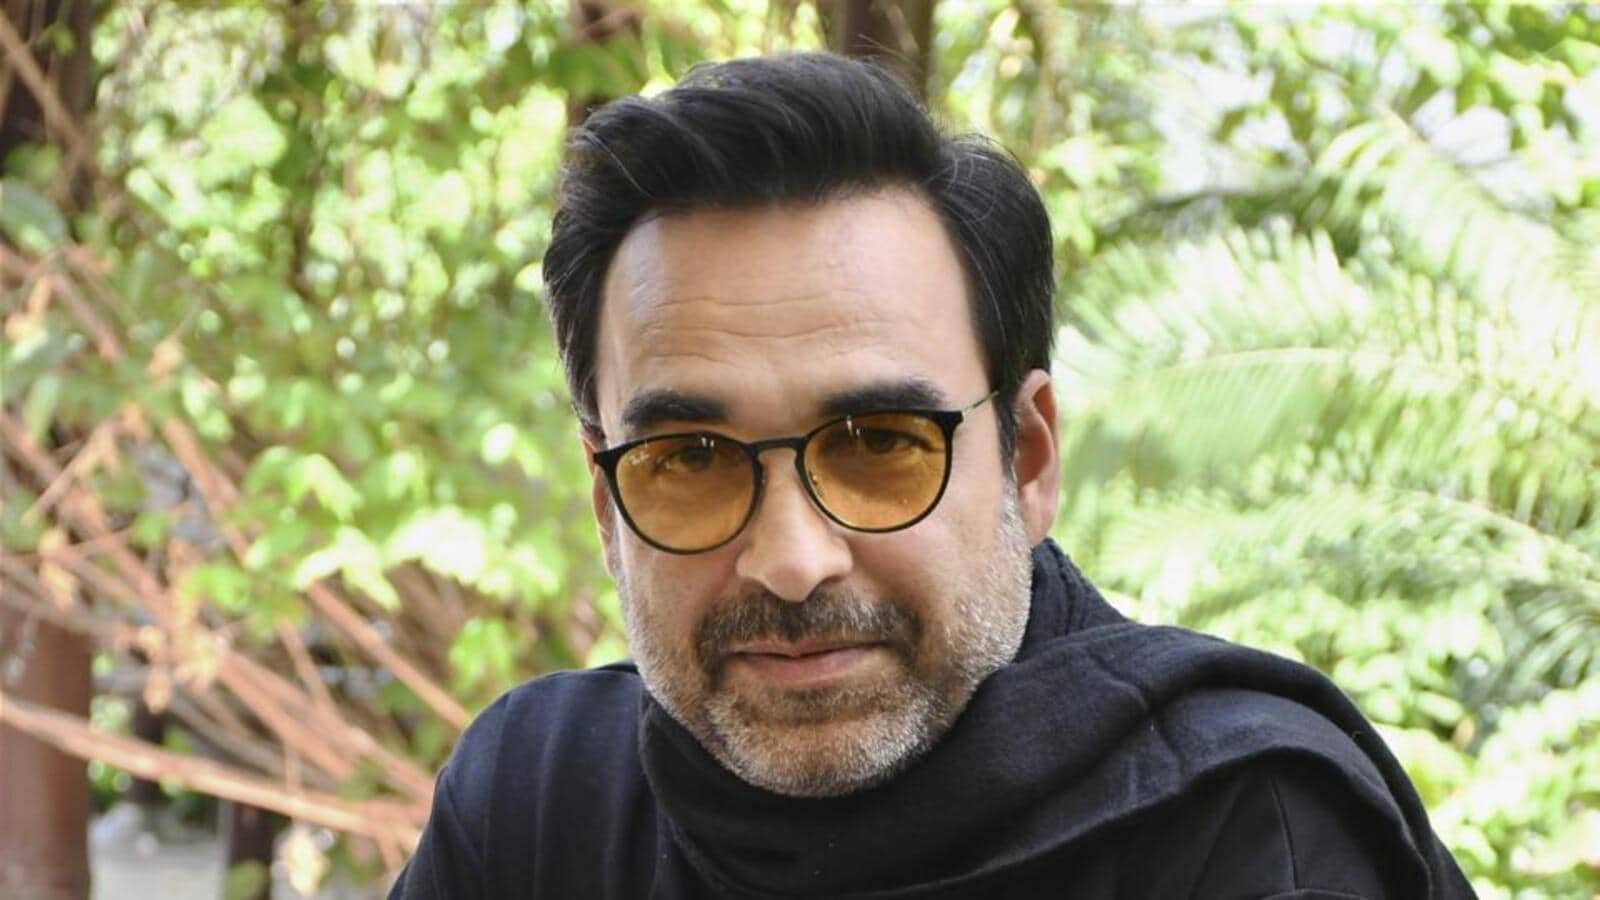 Pankaj Tripathi on becoming national icon by Election Commission of India: The love for democracy has pushed me to contribute